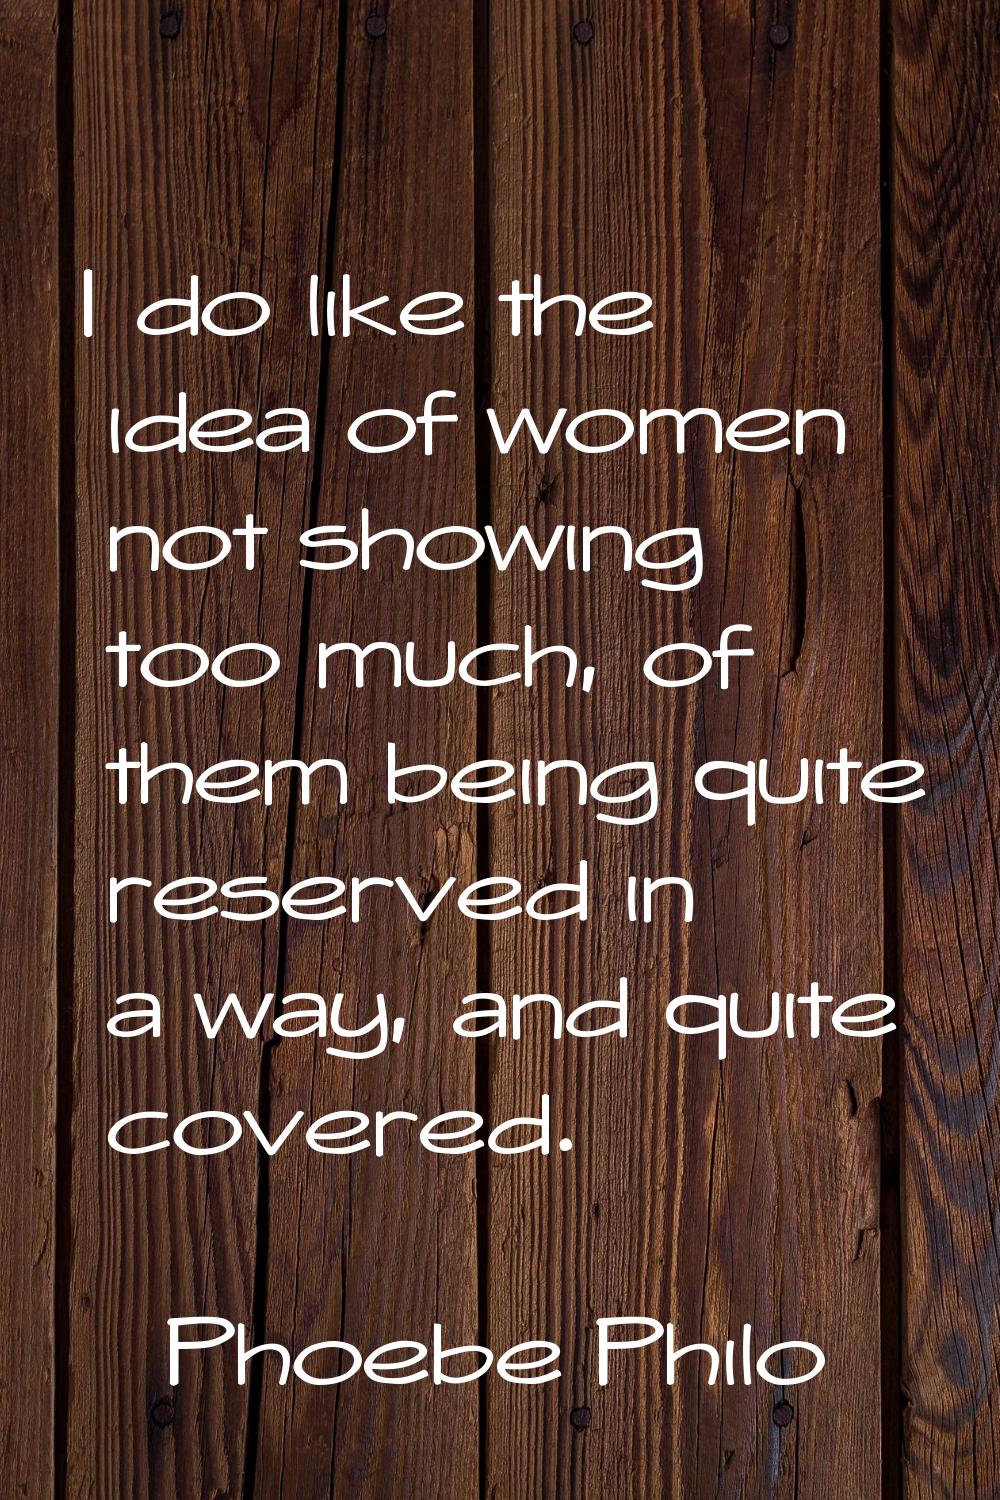 I do like the idea of women not showing too much, of them being quite reserved in a way, and quite 